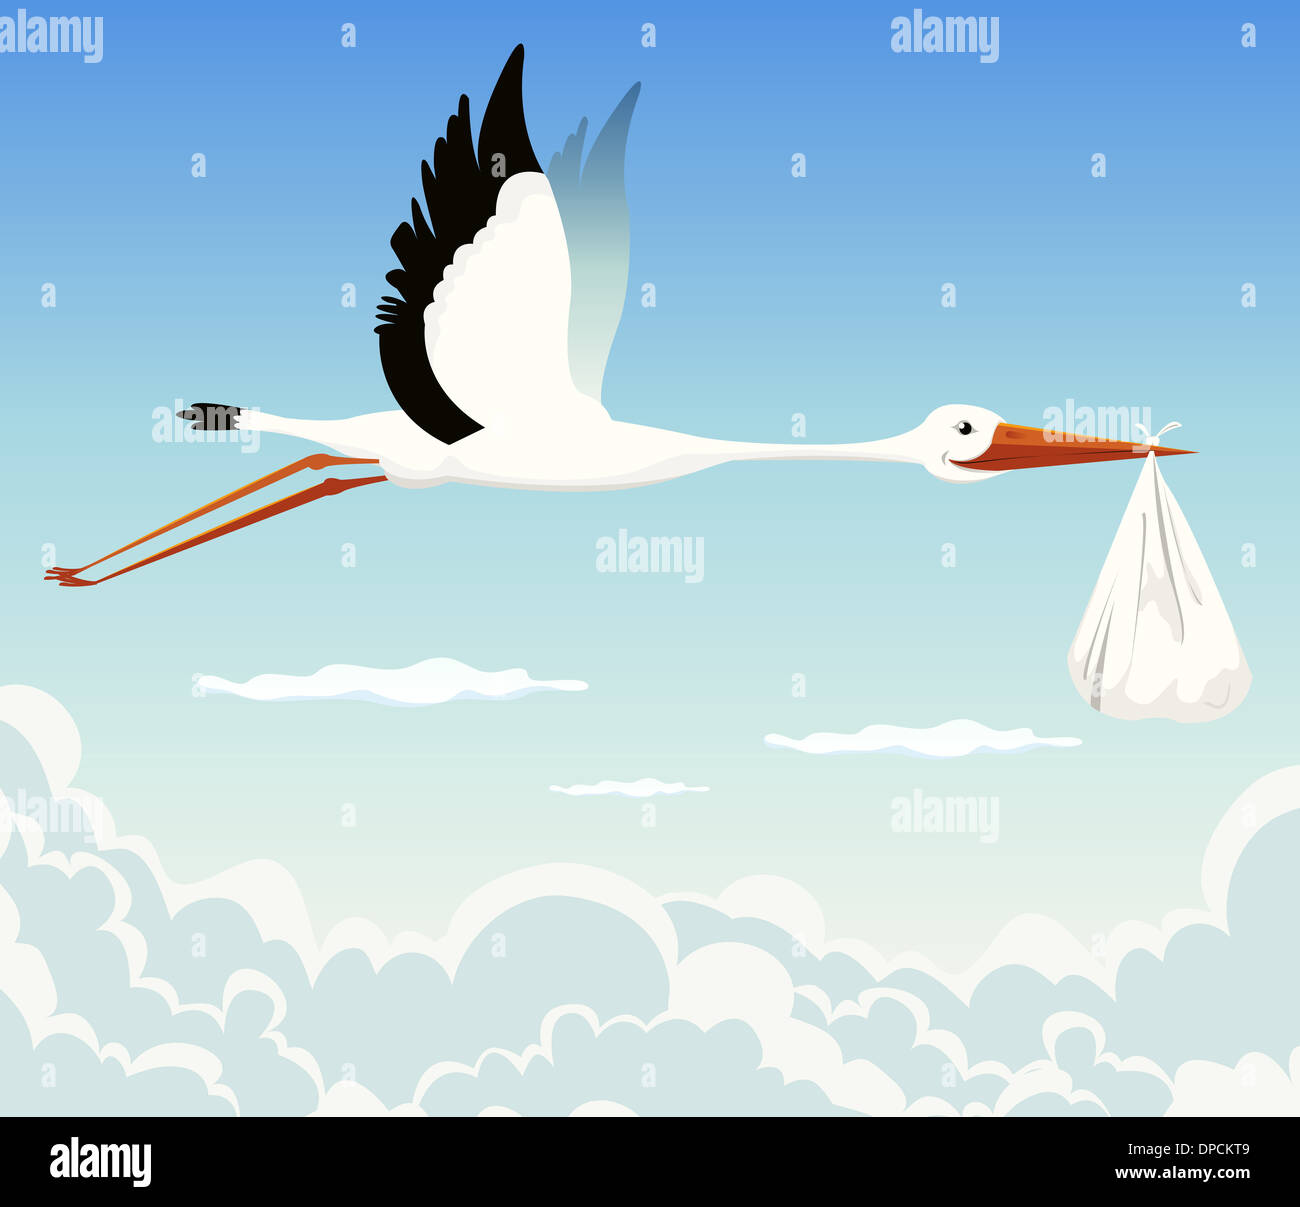 Illustration of a stork delivering baby in a bag for birth announcement, newborn holidays celebration and anniversaries Stock Photo